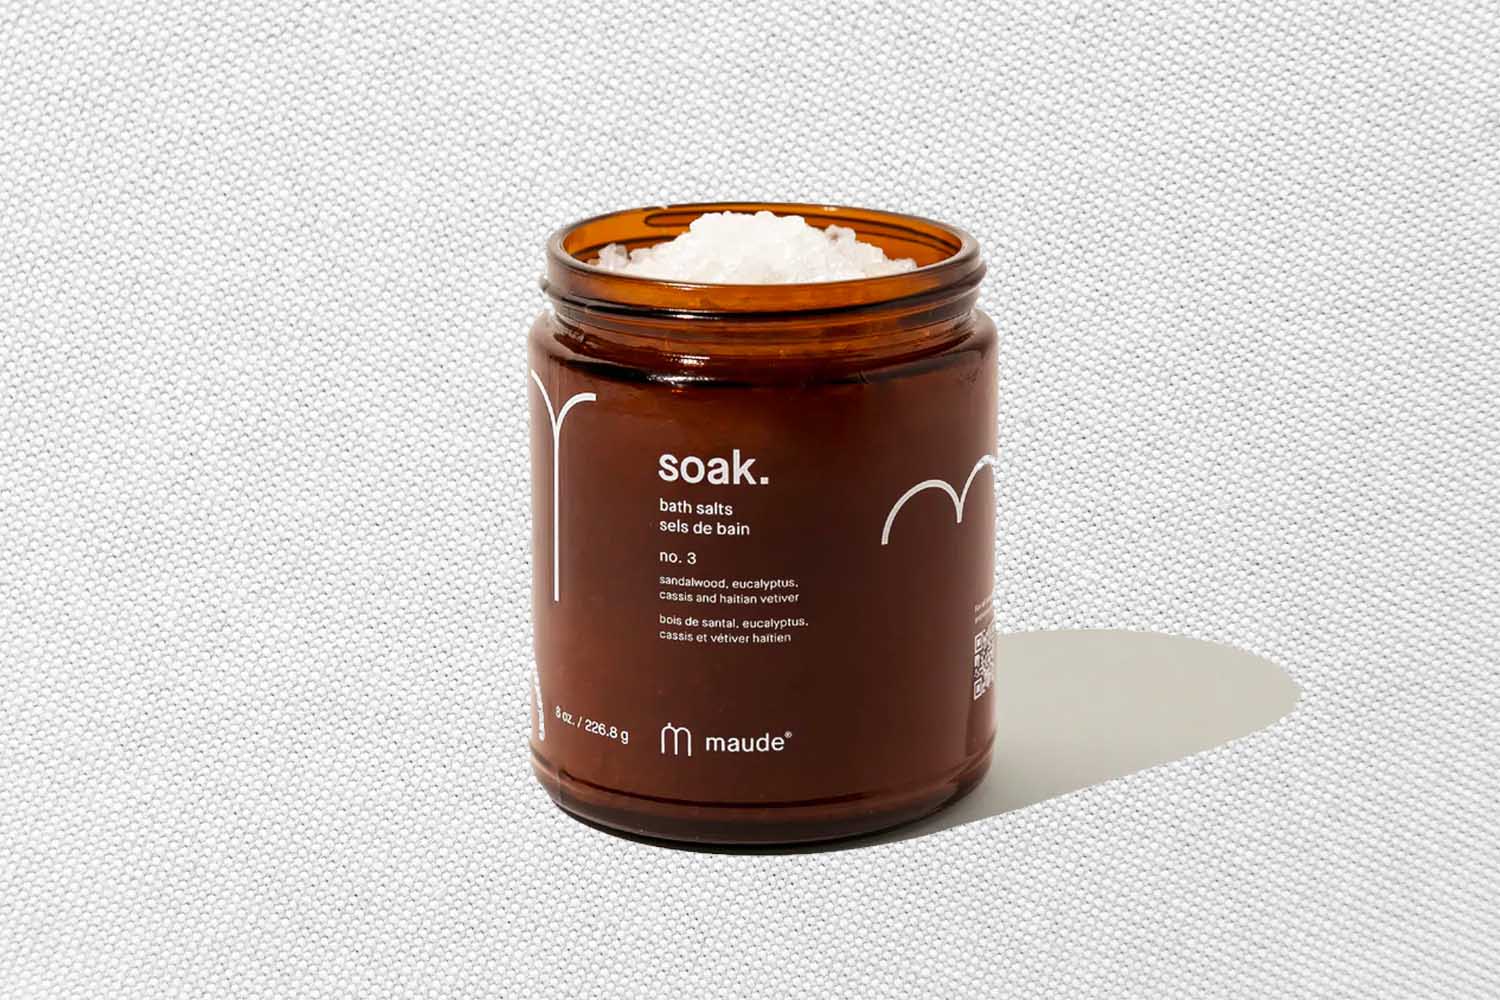 Maude Soak No.3 Bath Salts, one of the best women's gifts to give this September